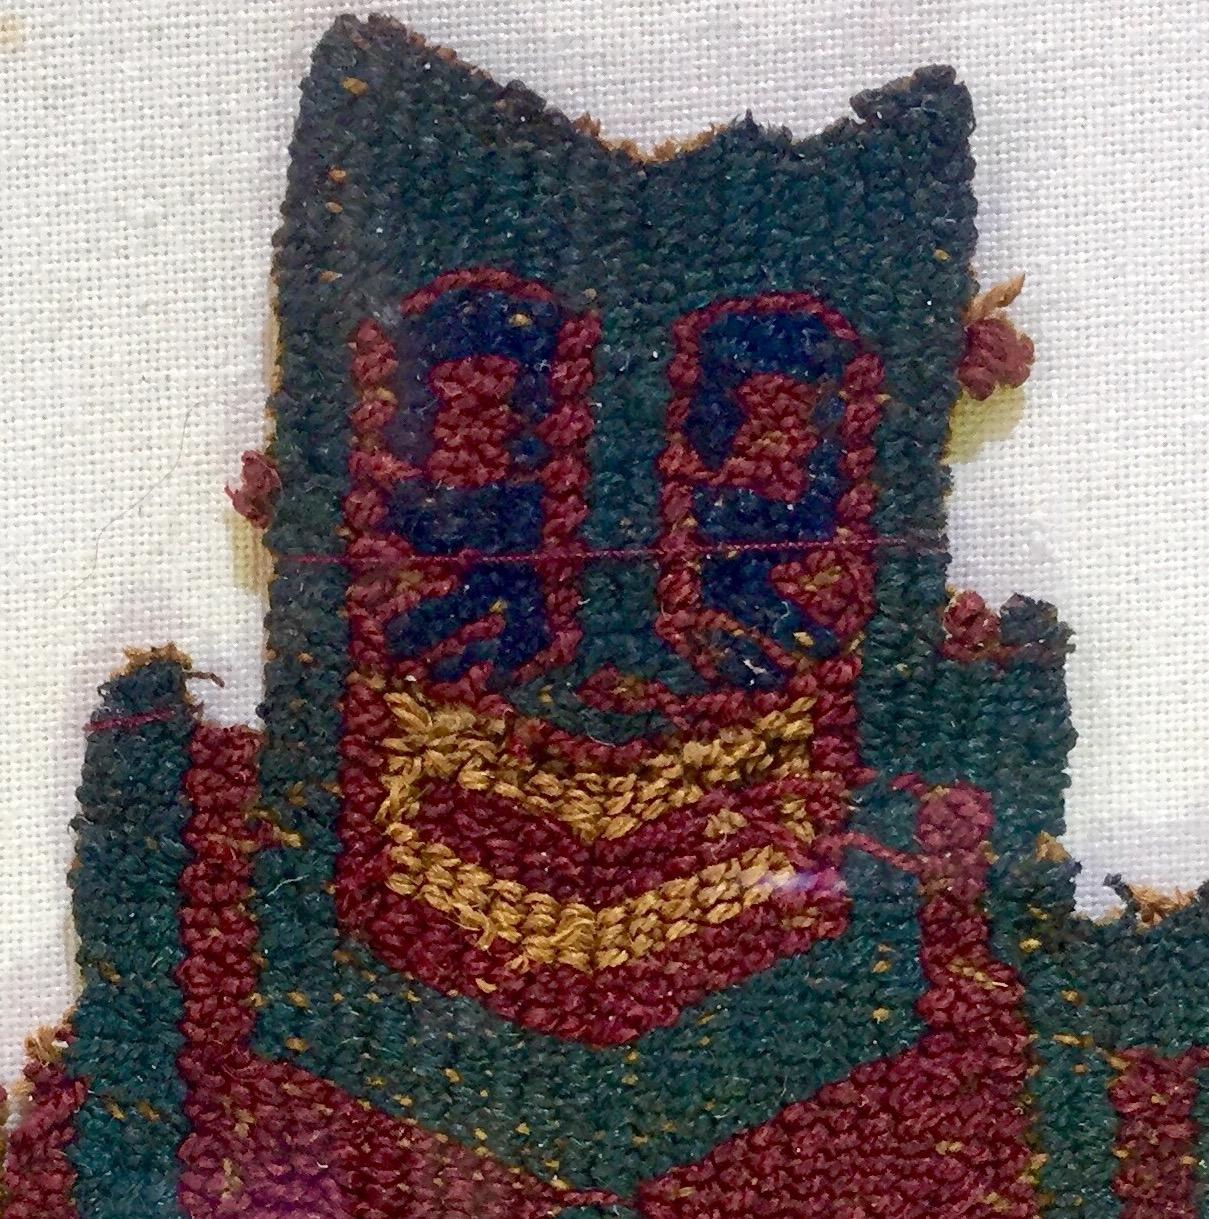 Magnificent Pre-Columbian Paracas textile fragment depicting a shaman warrior with a trophy head on his right hand. Framed and professionally sewn onto a beige linen cloth. Camelid fibers.

Provenance: Private French collection

Dimensions with